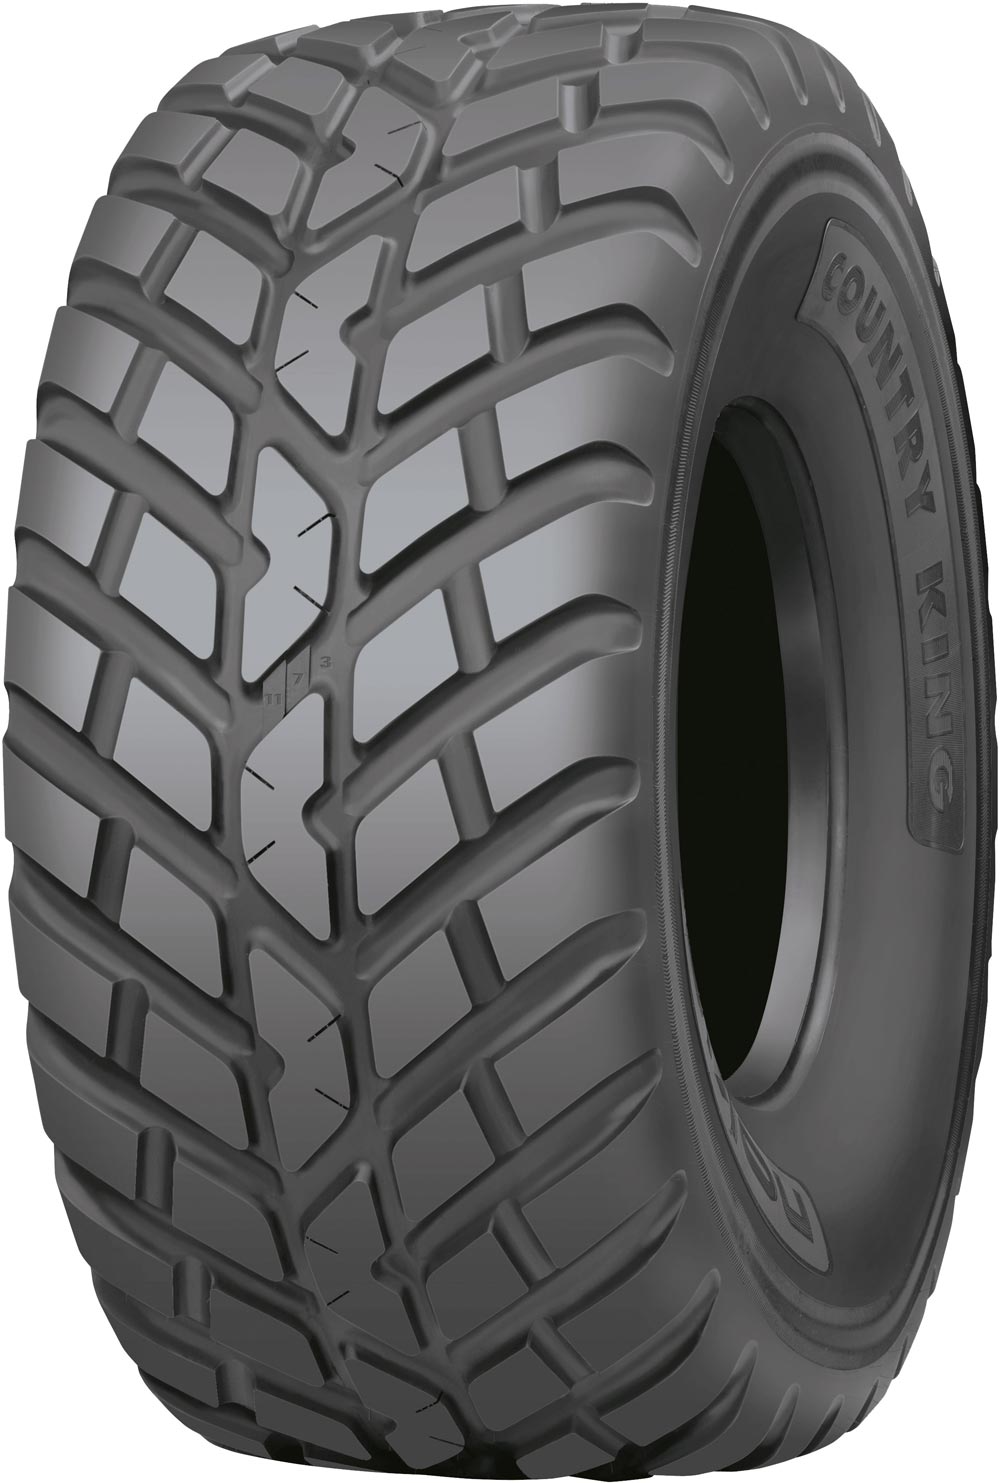 product_type-industrial_tires NOKIAN COUNTRY KING TL 560/60 R22.5 161D